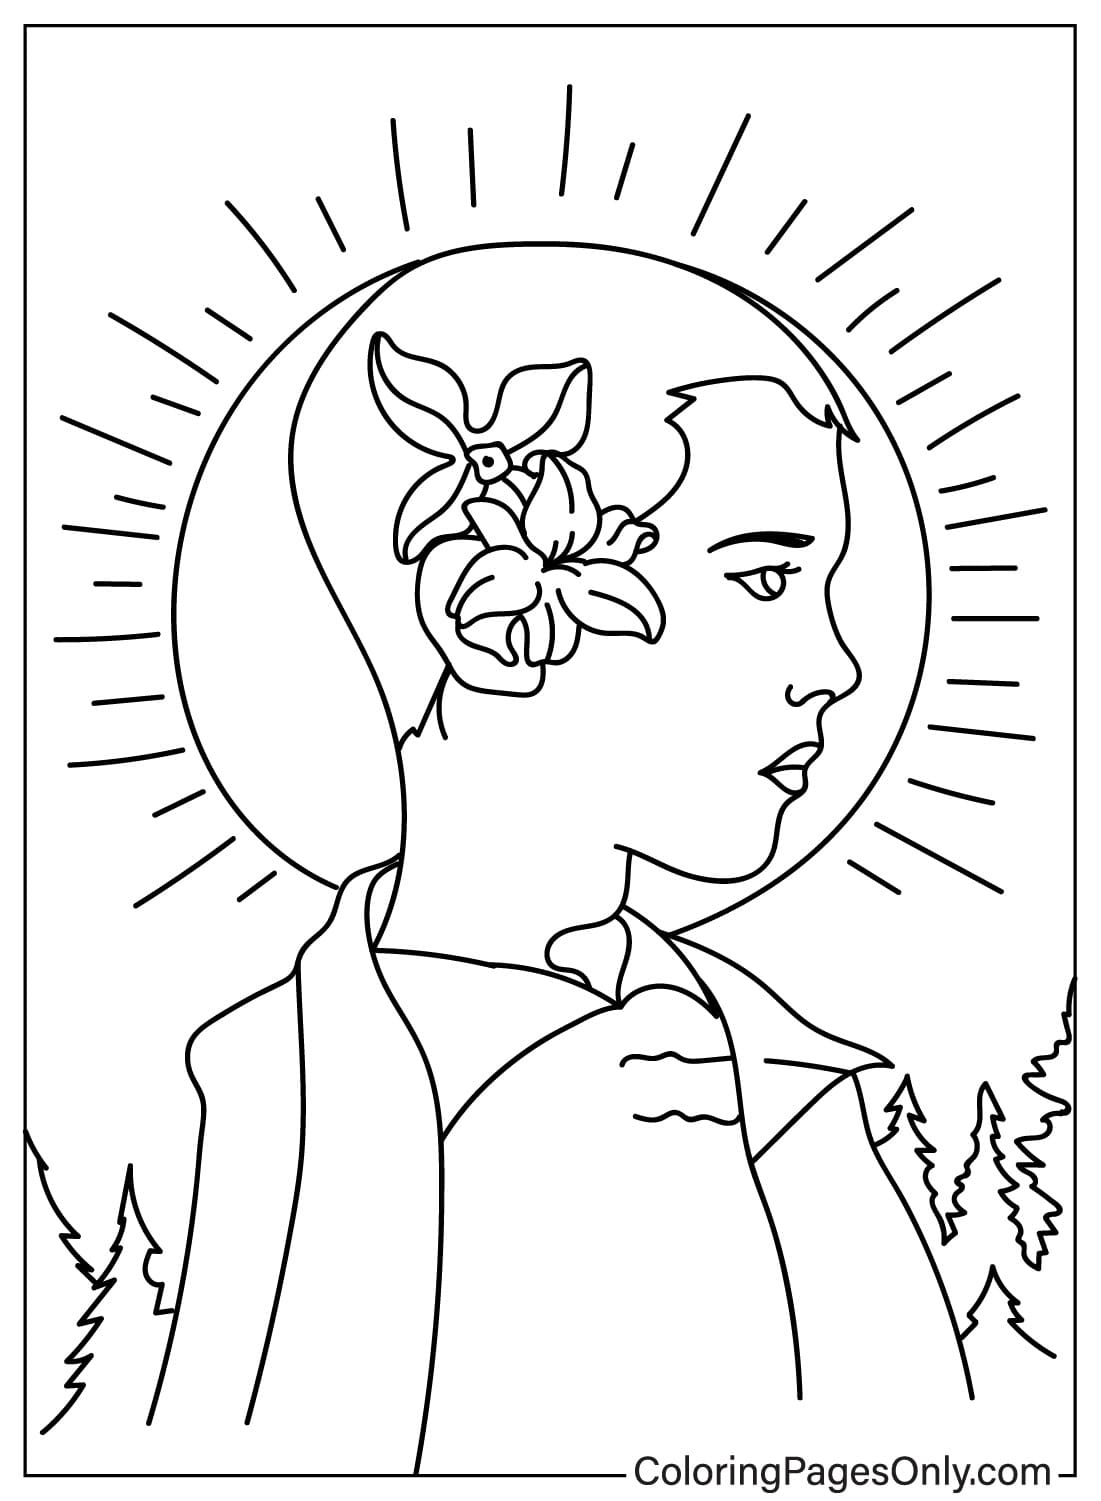 Free Stranger Things Coloring Page